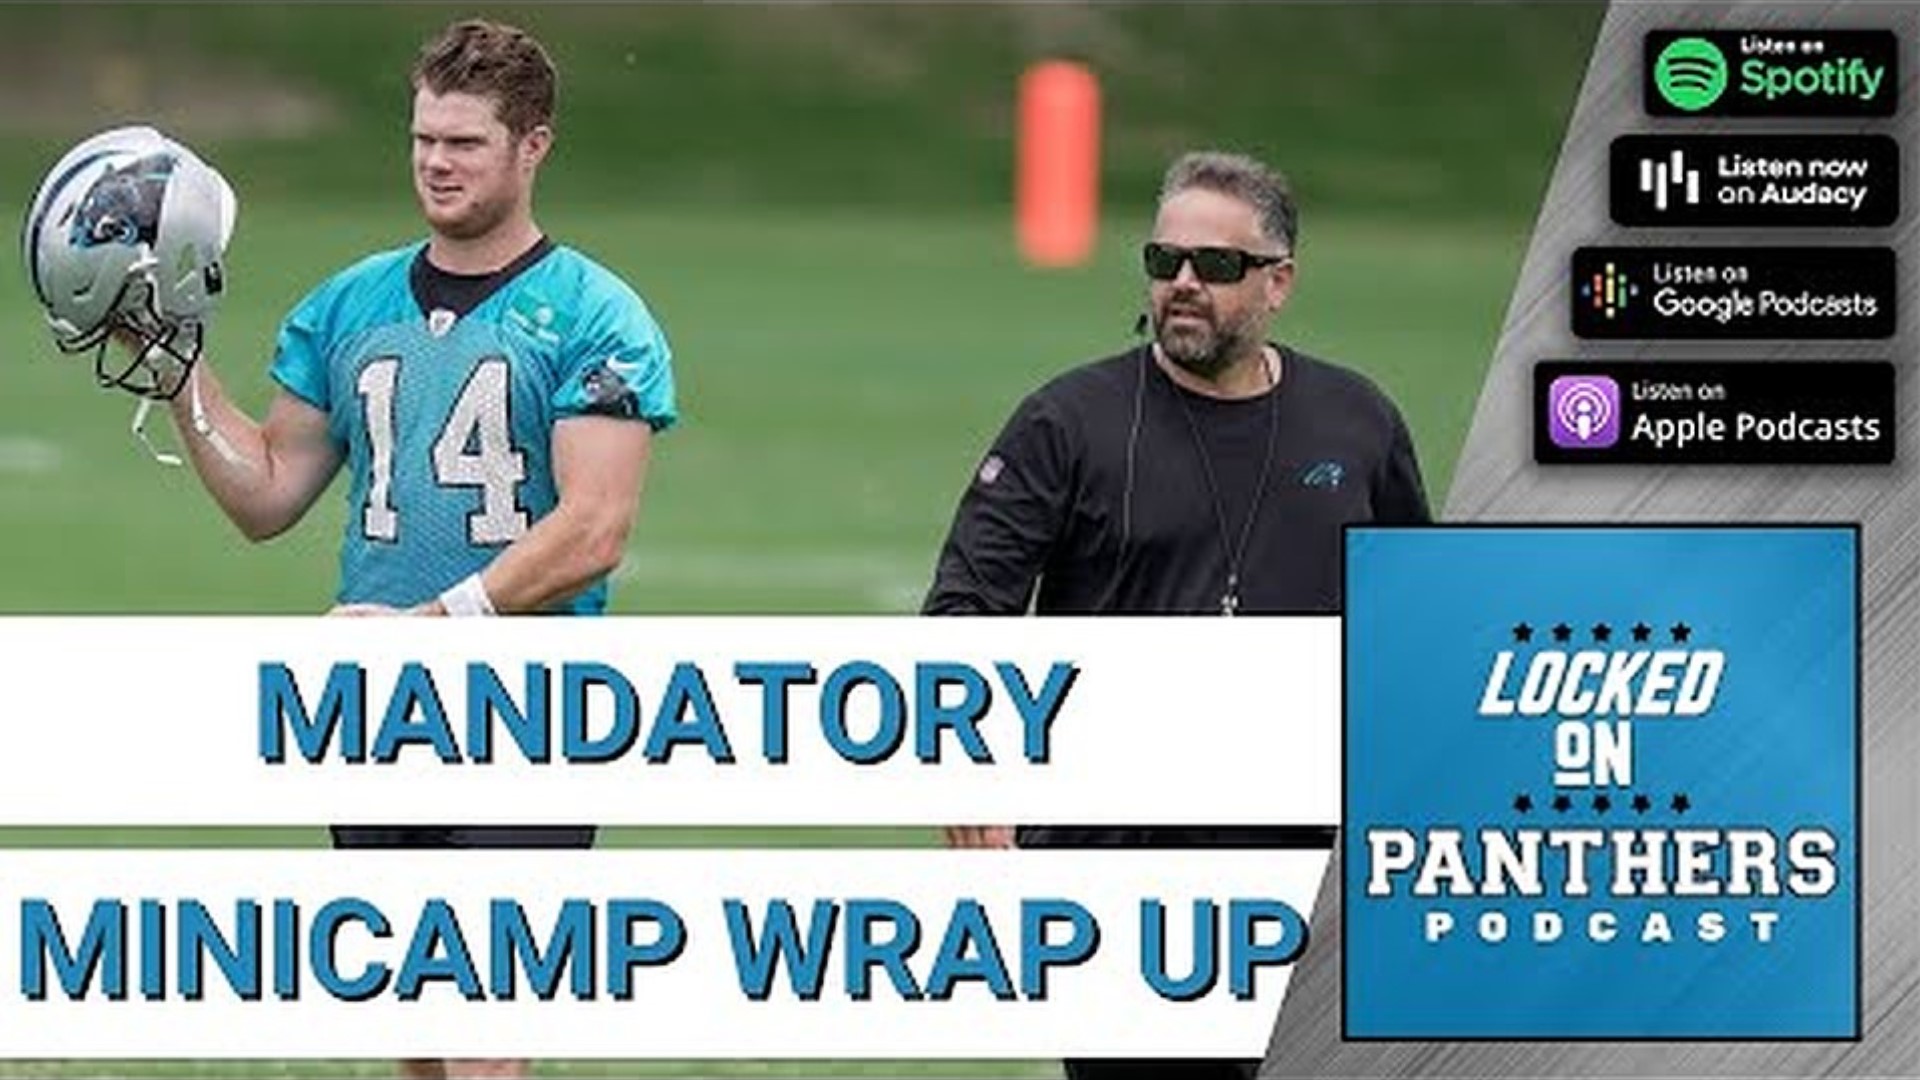 WCNC Sports Director Nick Carboni joined Julian Council to wrap up the Carolina Panthers mandatory minicamp.